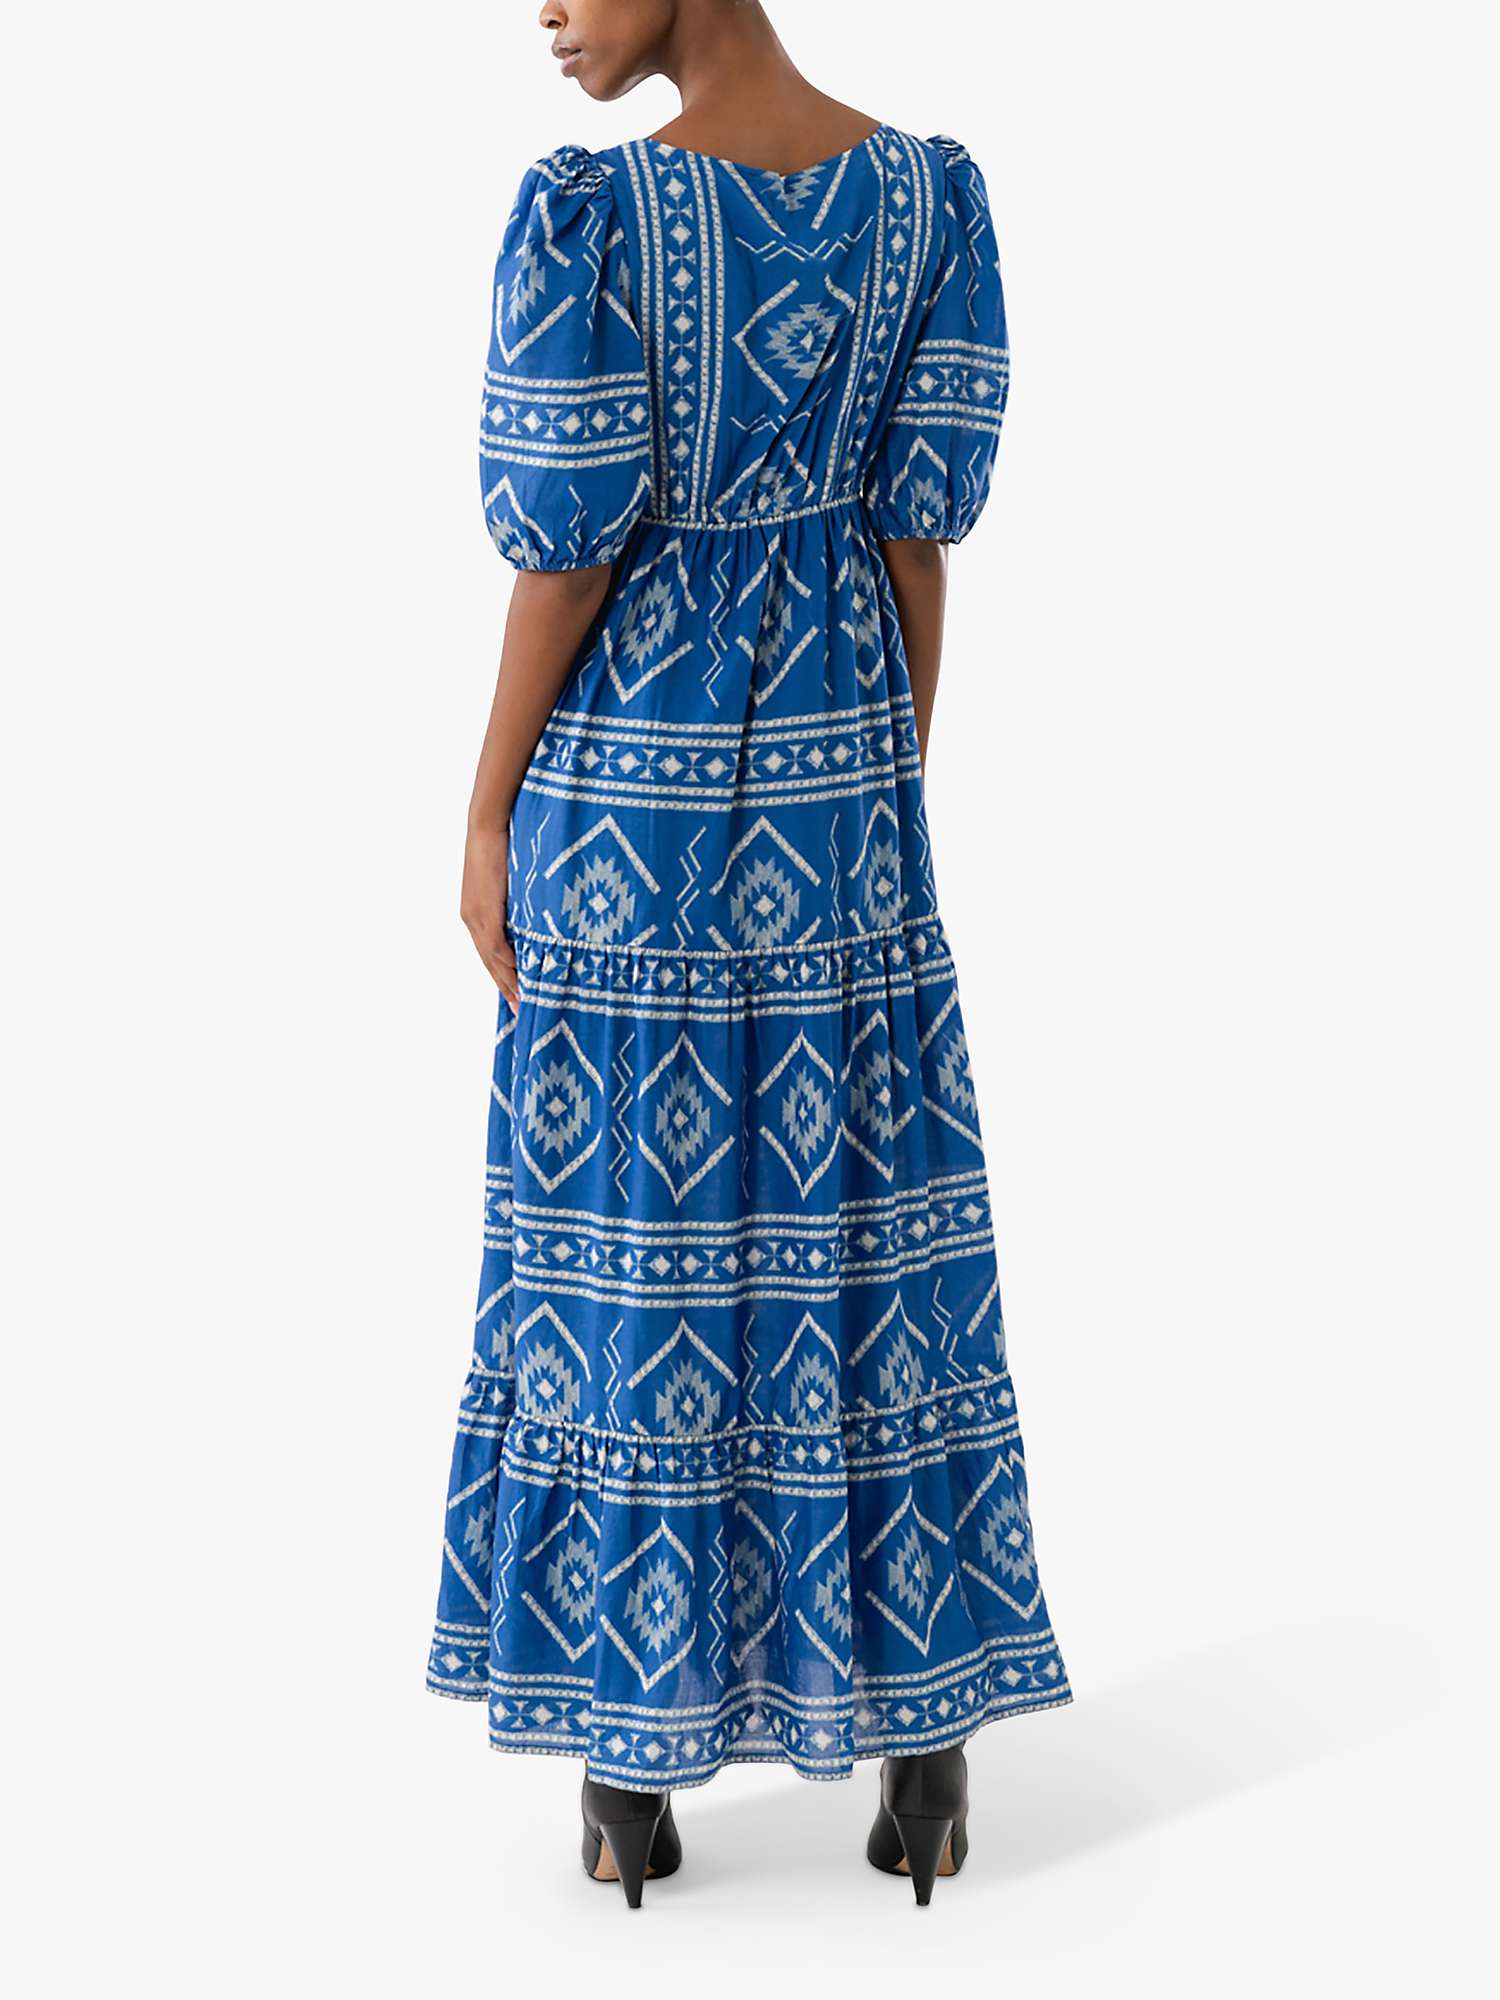 Buy Lollys Laundry Gambo Abstract Print Maxi Dress, Blue/White Online at johnlewis.com